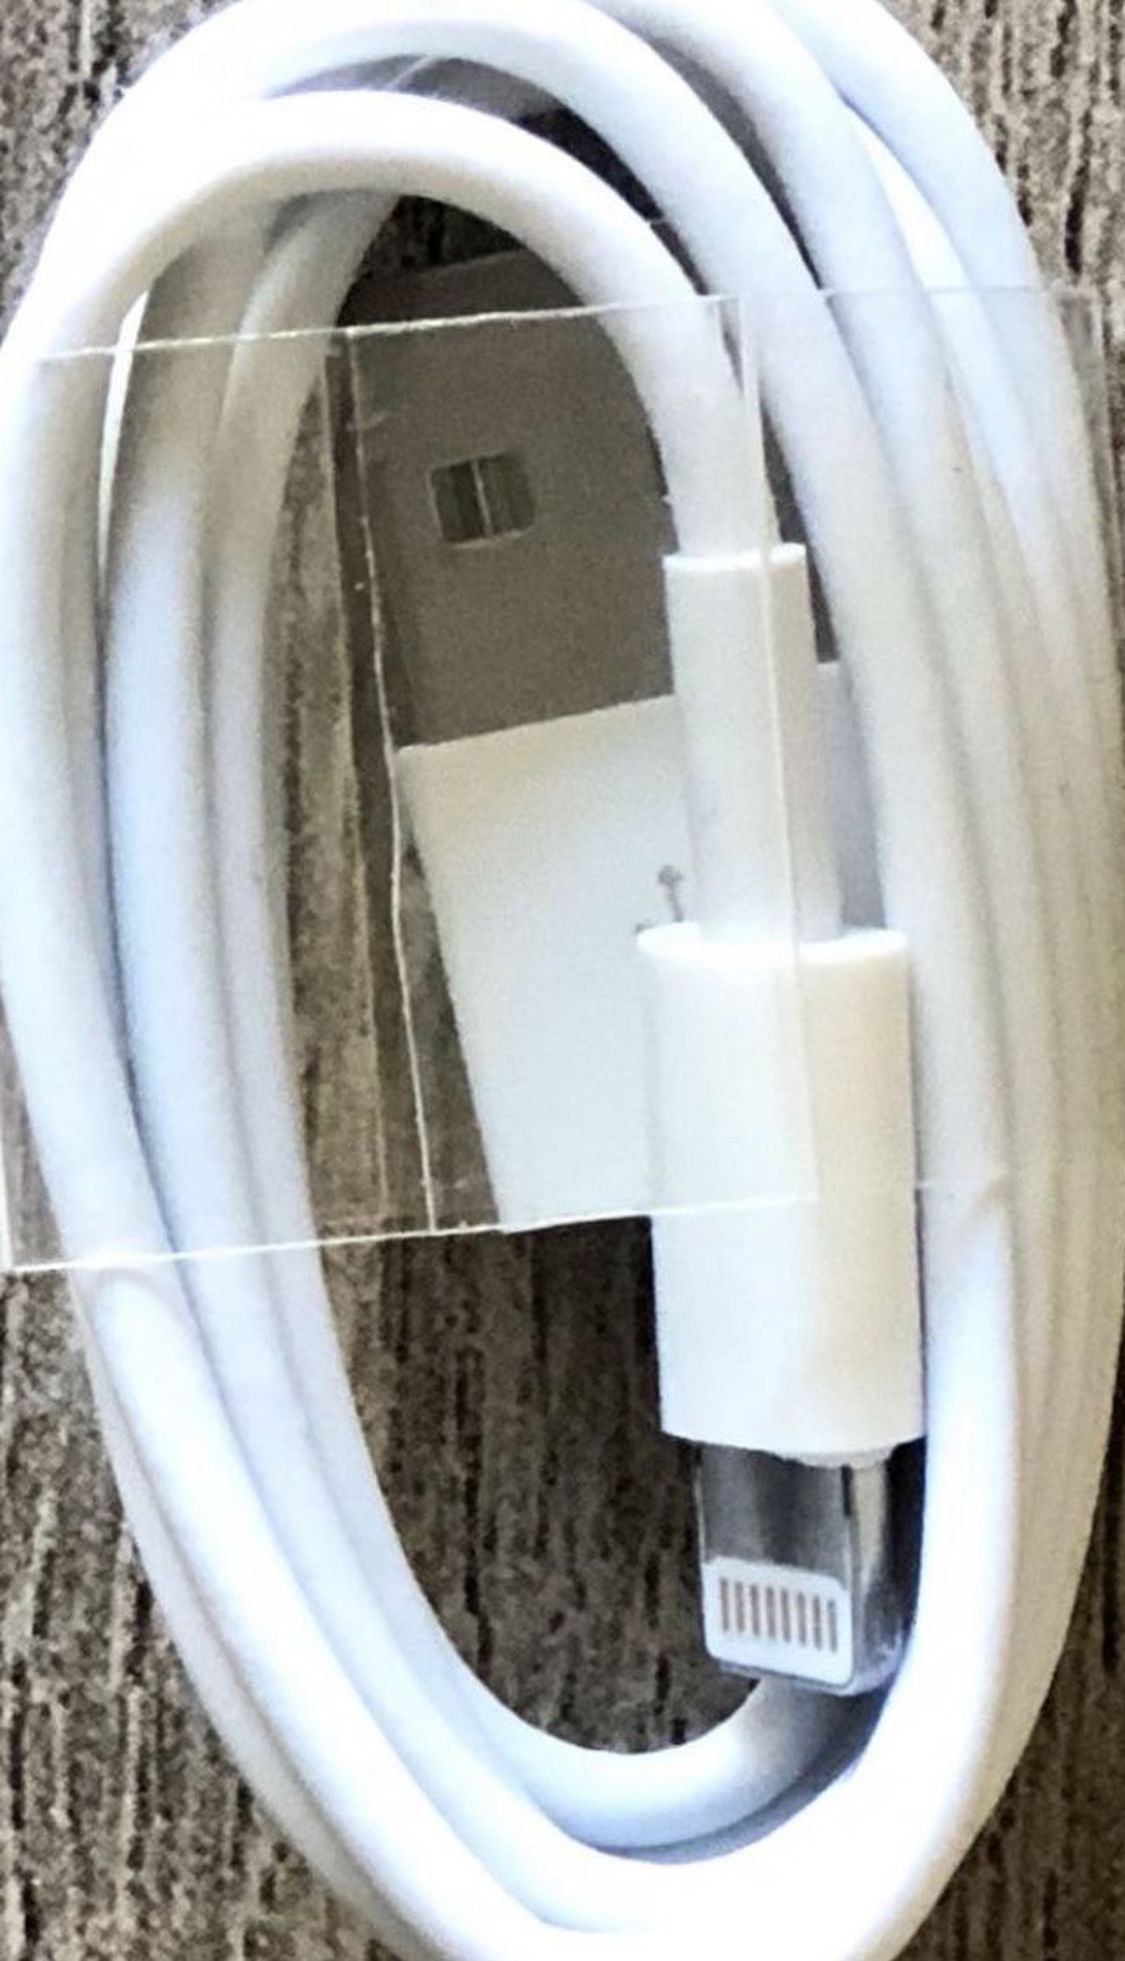 Brand New Apple Original iPhone USB lightning charger cable